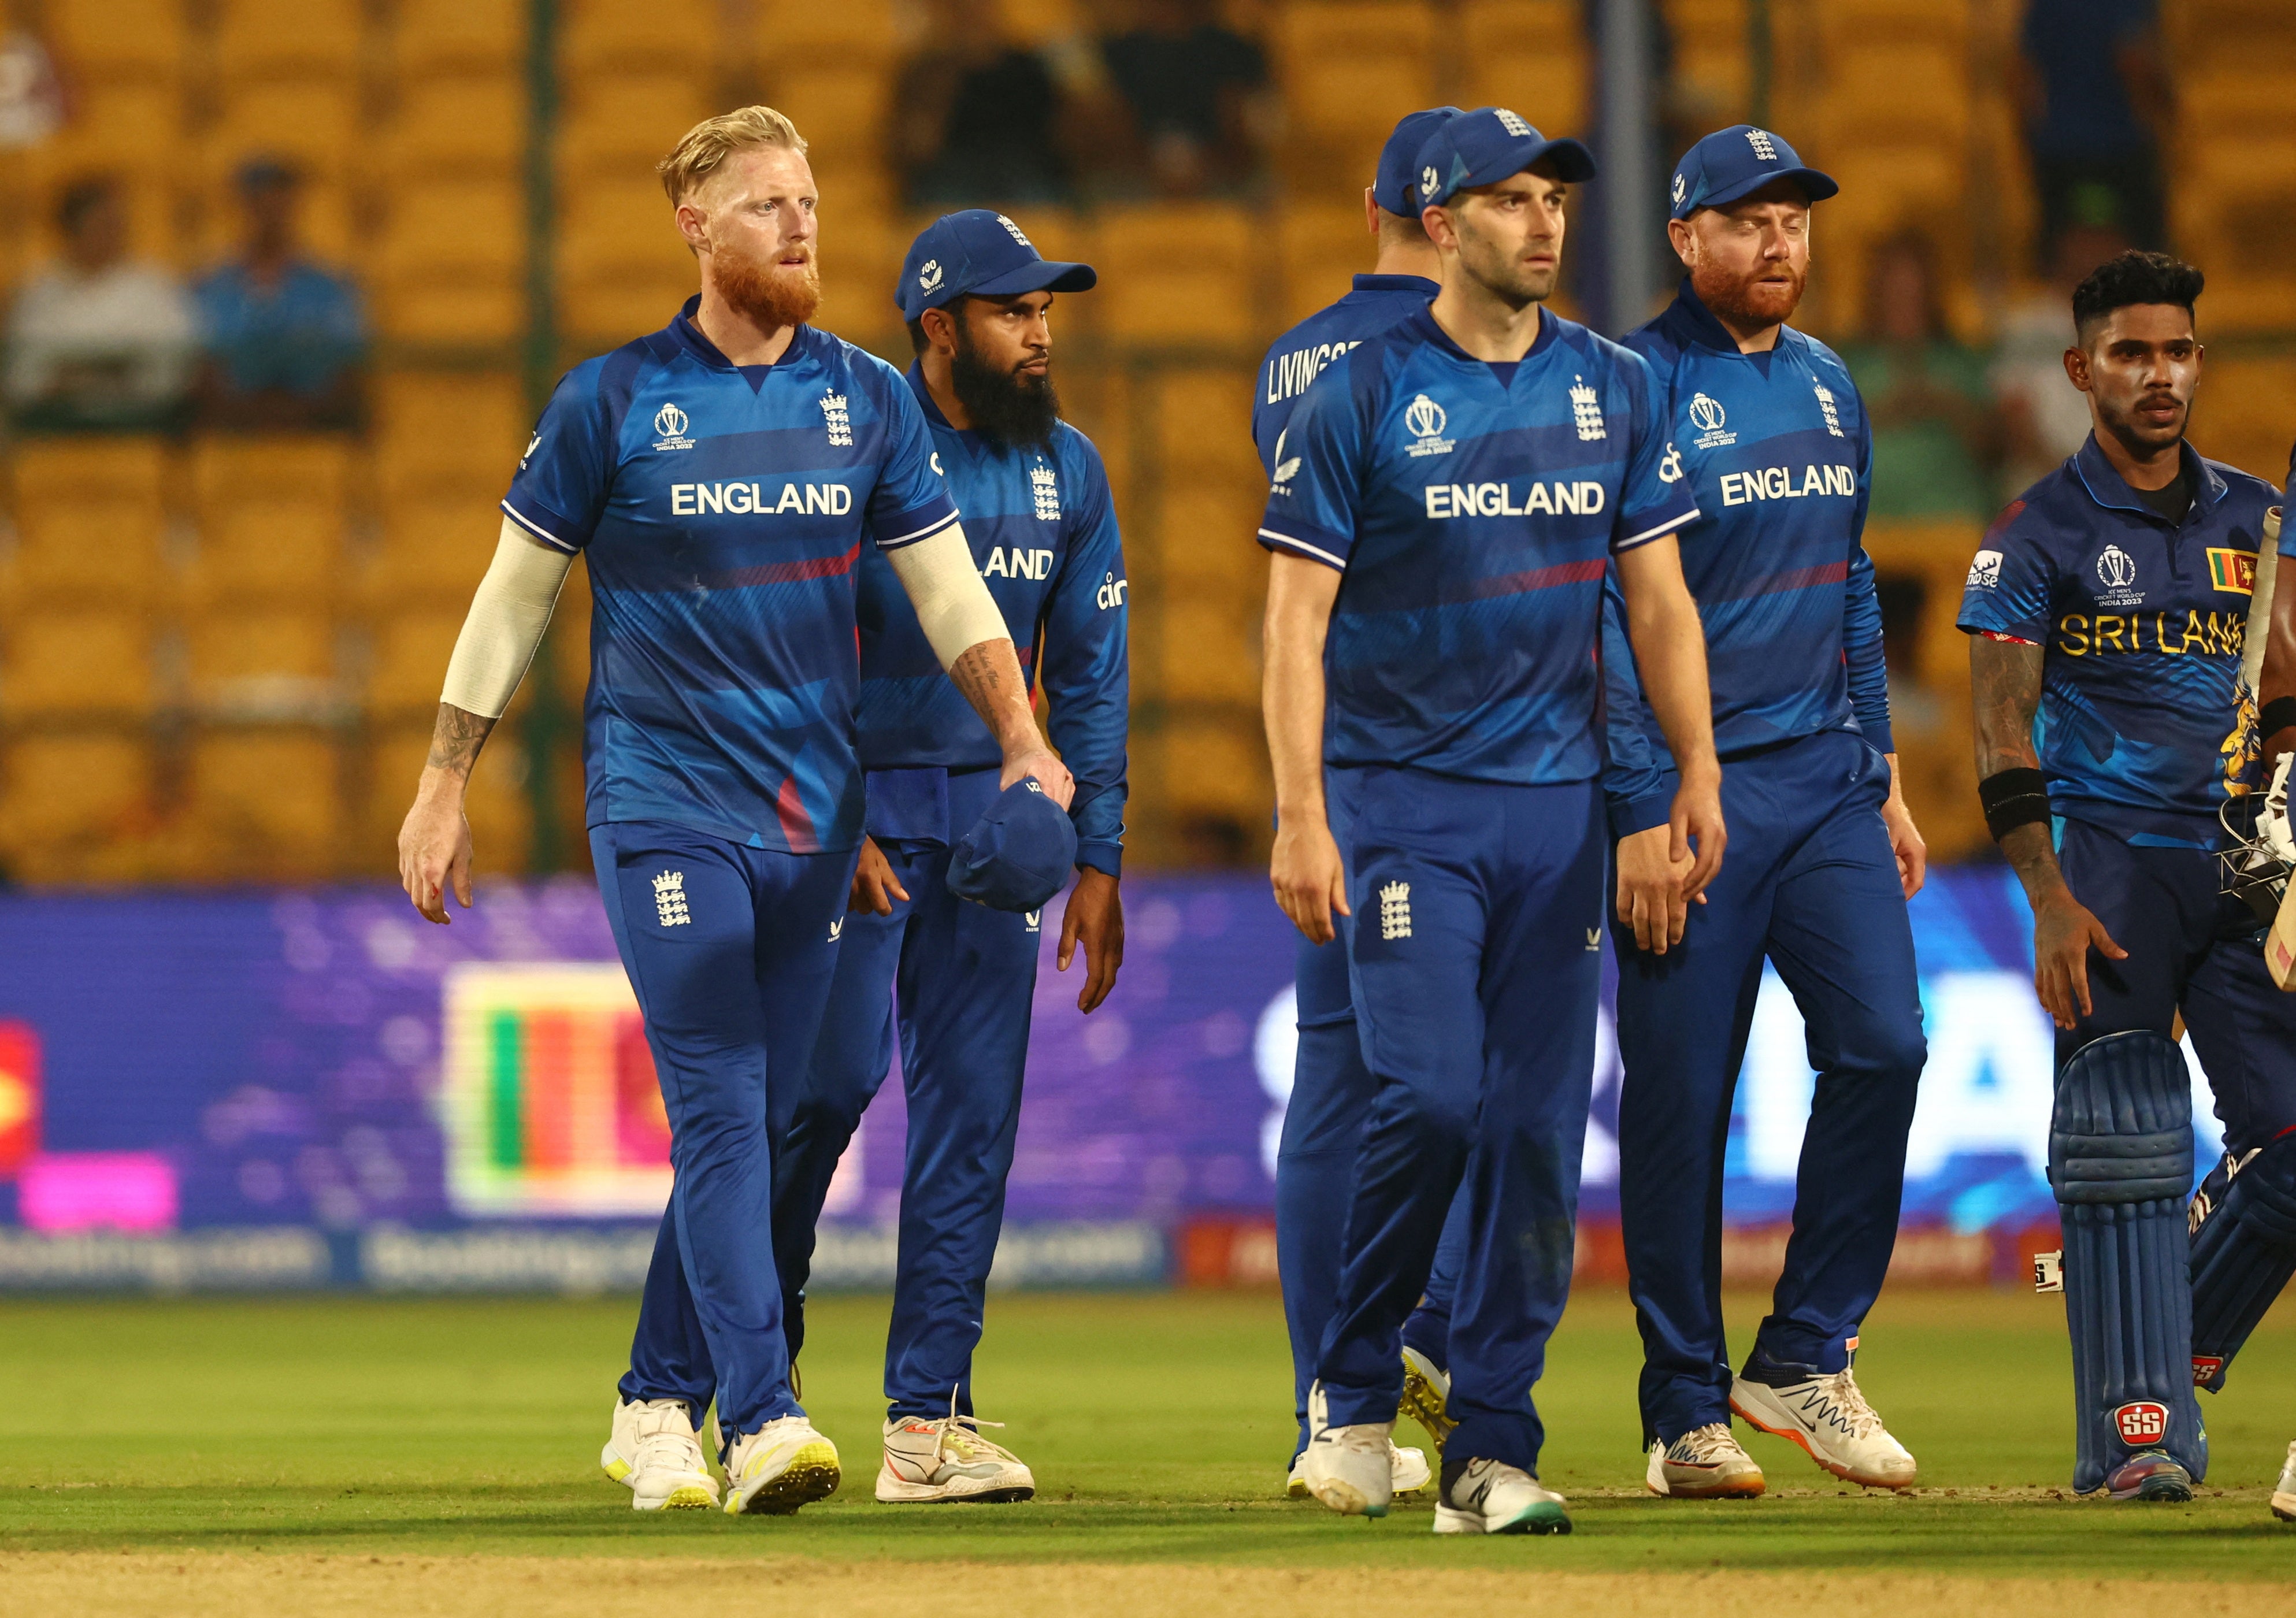 England were left dejected after defeat to Sri Lanka